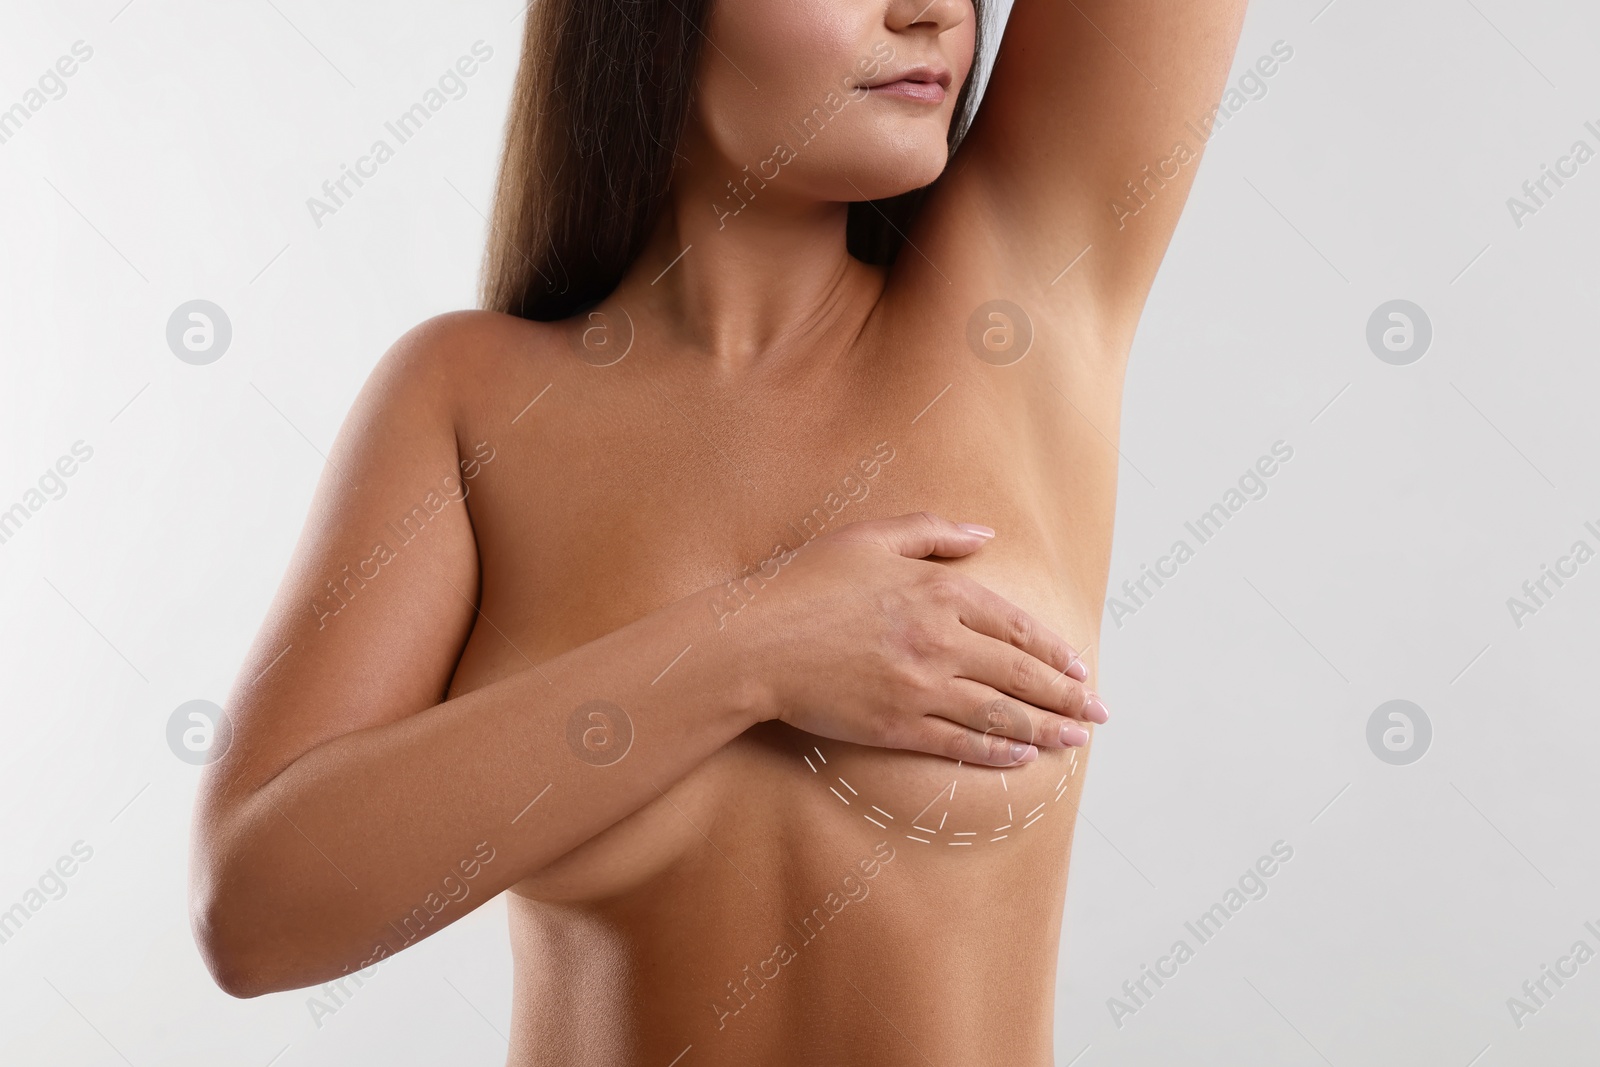 Image of Breast augmentation. Woman with markings for plastic surgery on skin against white background, closeup